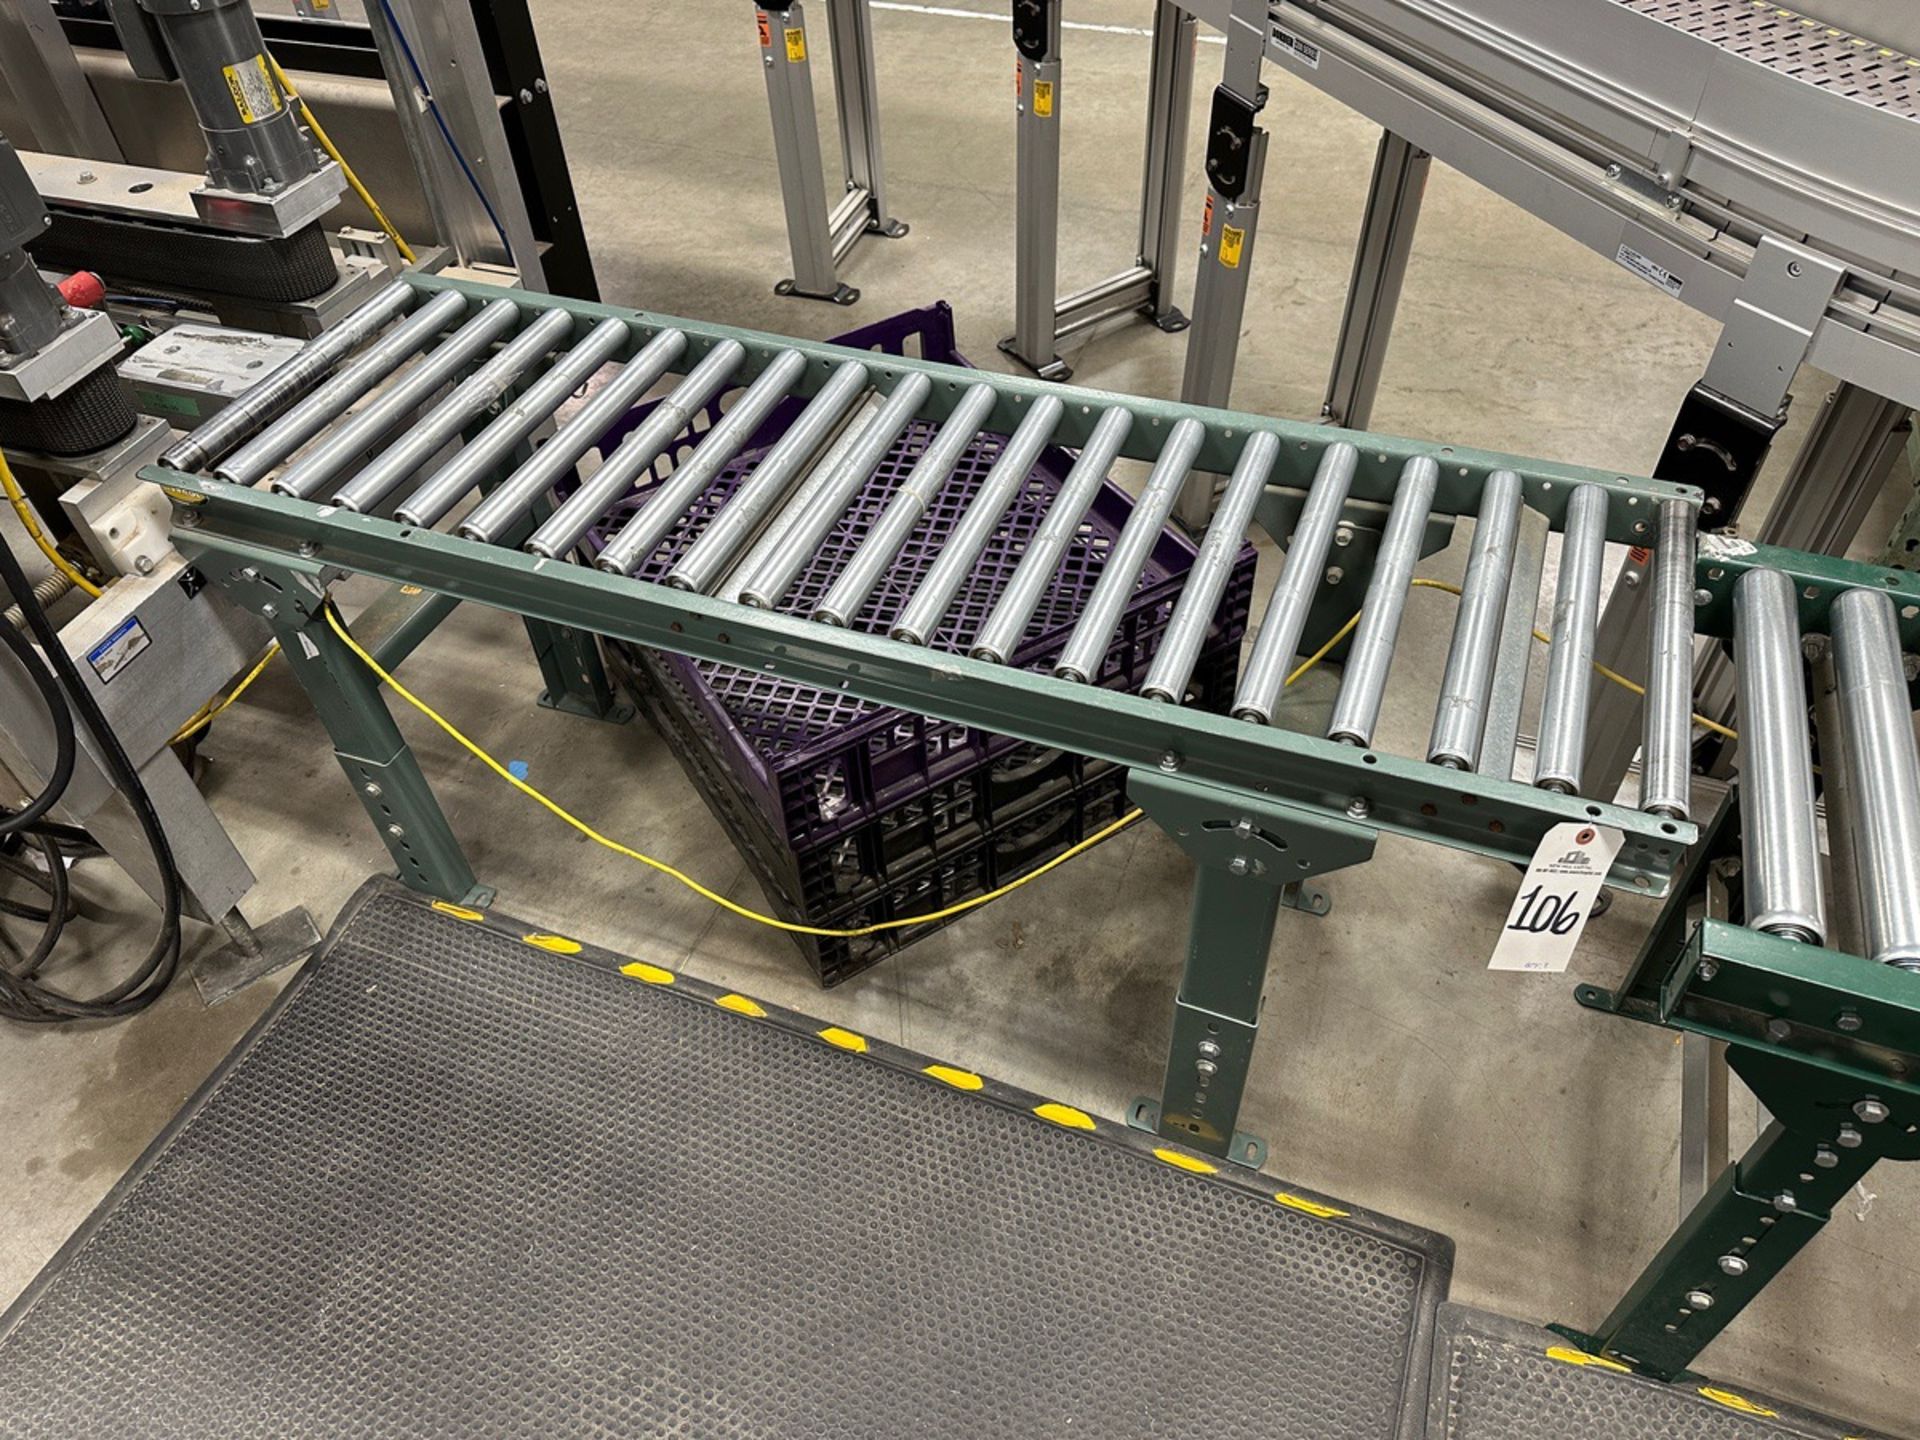 Lot of (3) Roller Conveyor Sections (Approx. 16" x 10', 16" x 5' and 16" x 10') | Rig Fee $200